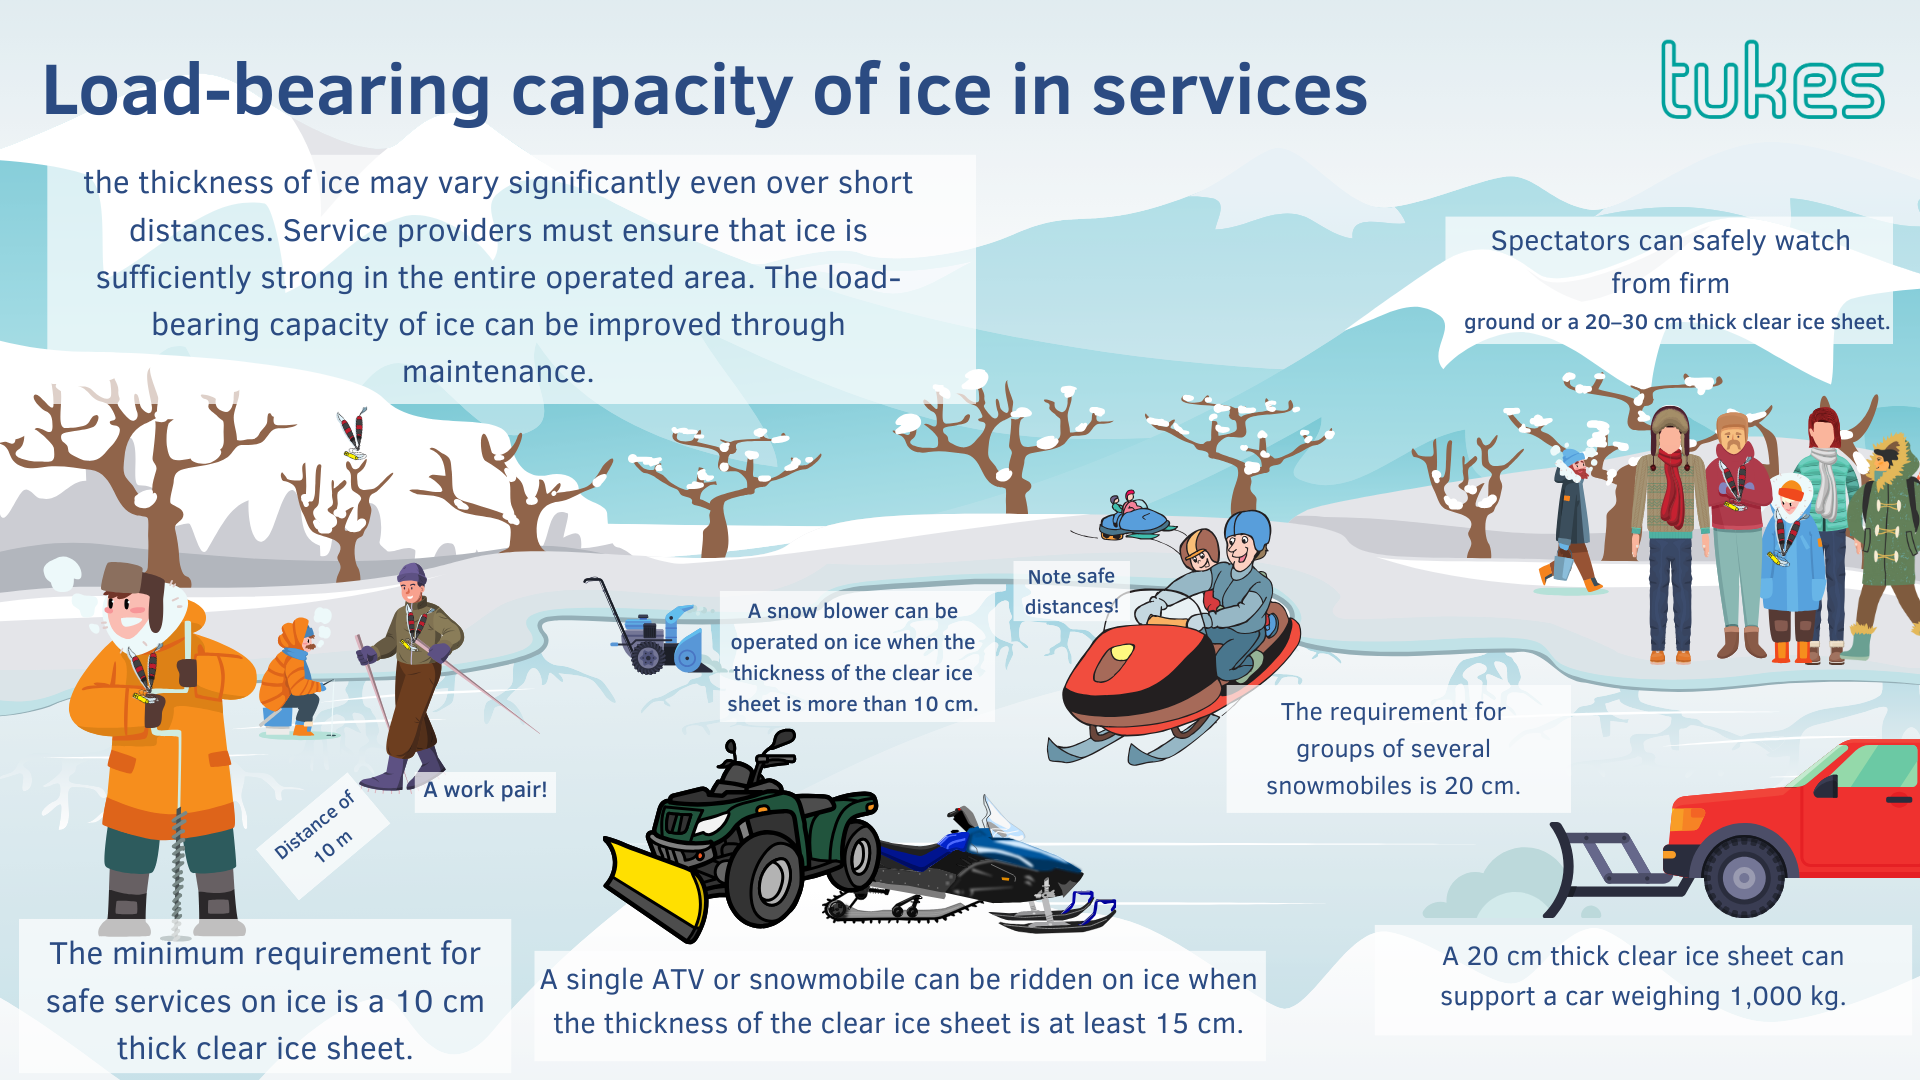 Load-bearing capacity of ice in services, the thickness of ice may vary significantly even over short distances,Service providers must ensure that ice is sufficiently strong in the entire operated area. The load-bearing capacity of ice can be improved through maintenance. 